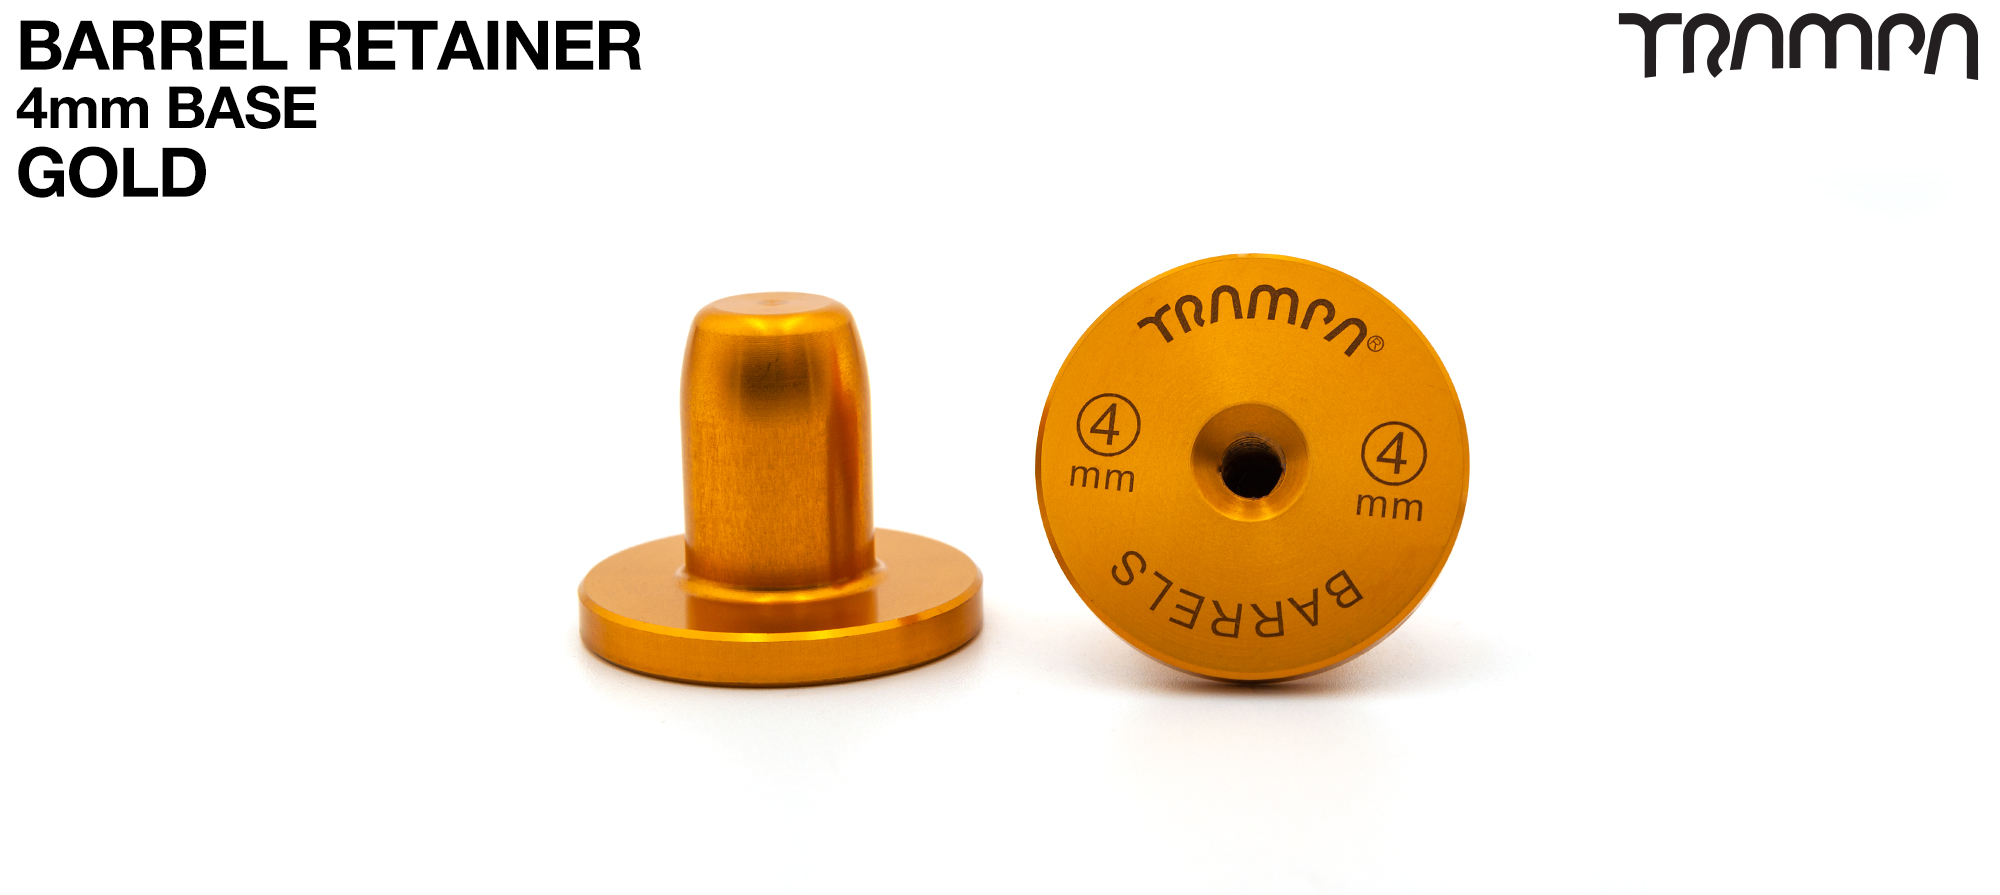 GOLD 4mm Barrel Retainers 